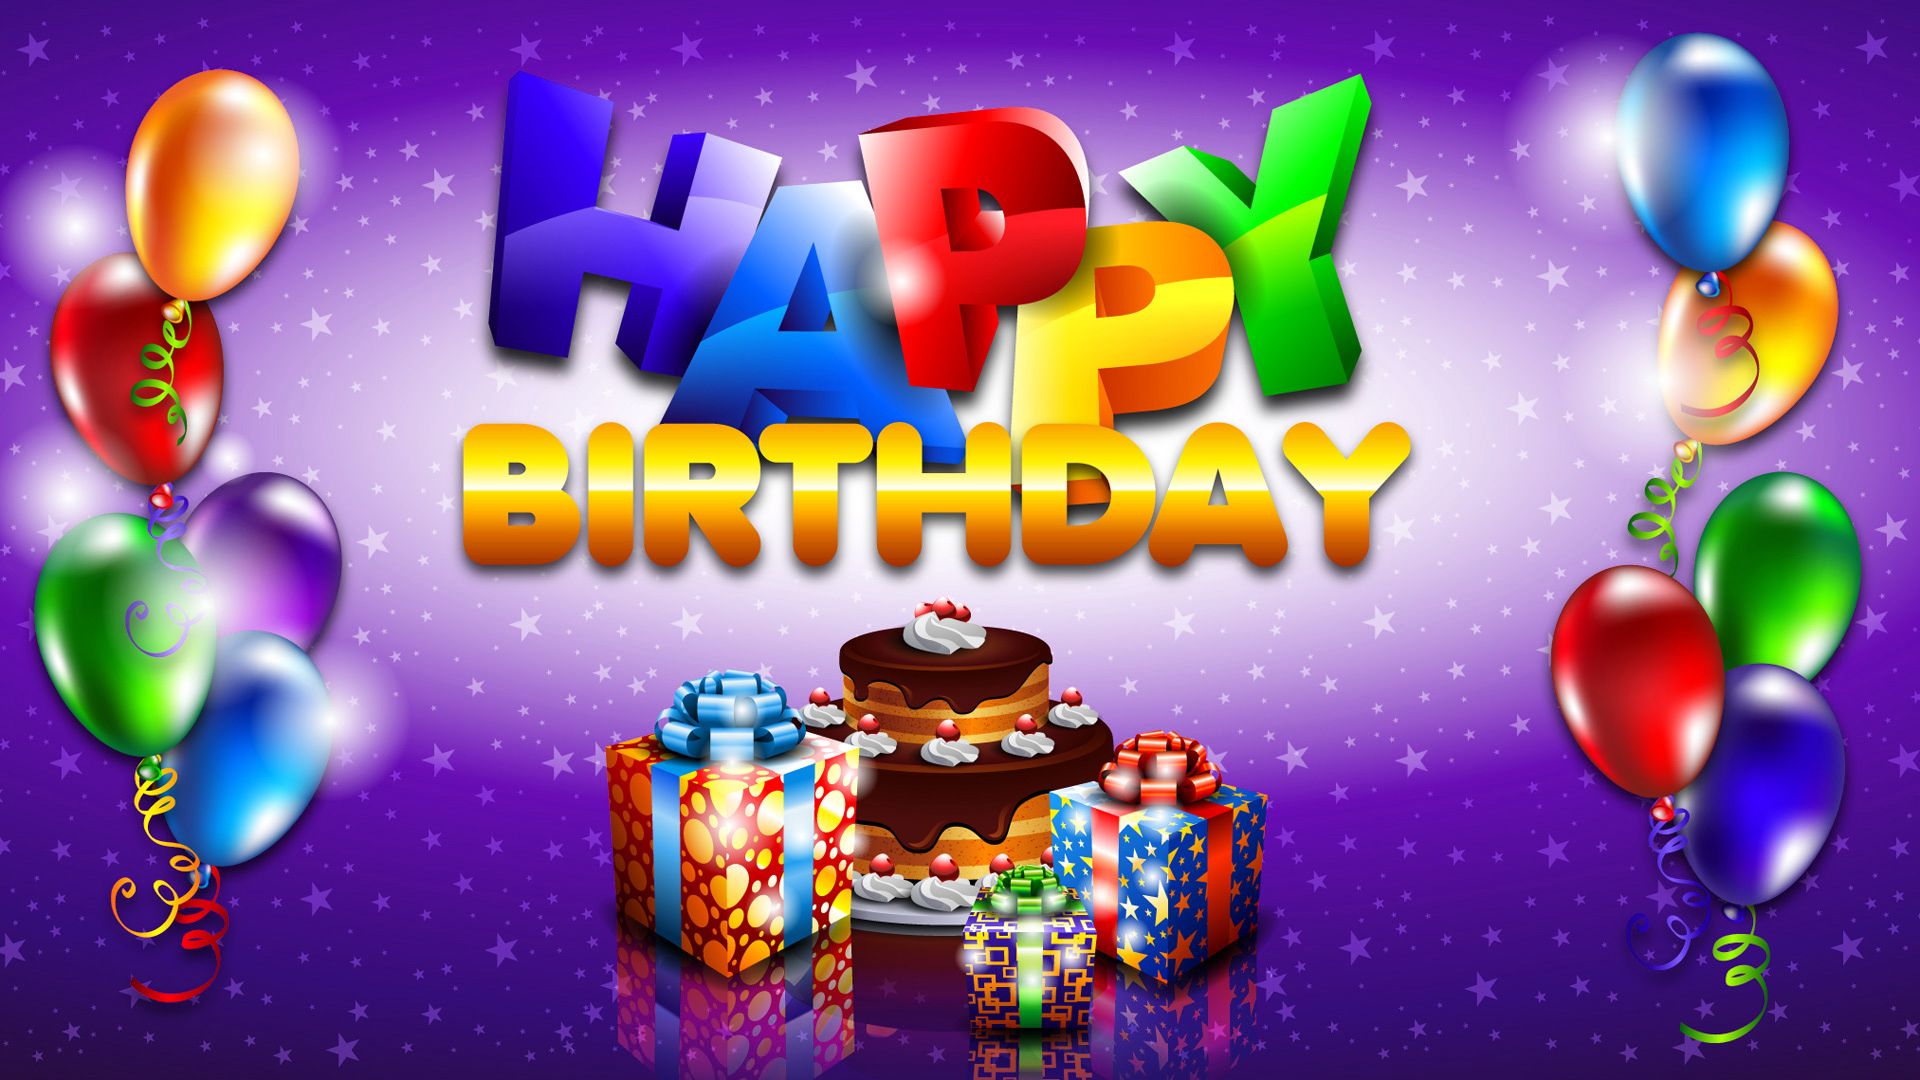 Happy Birthday 3D Wishes Images 